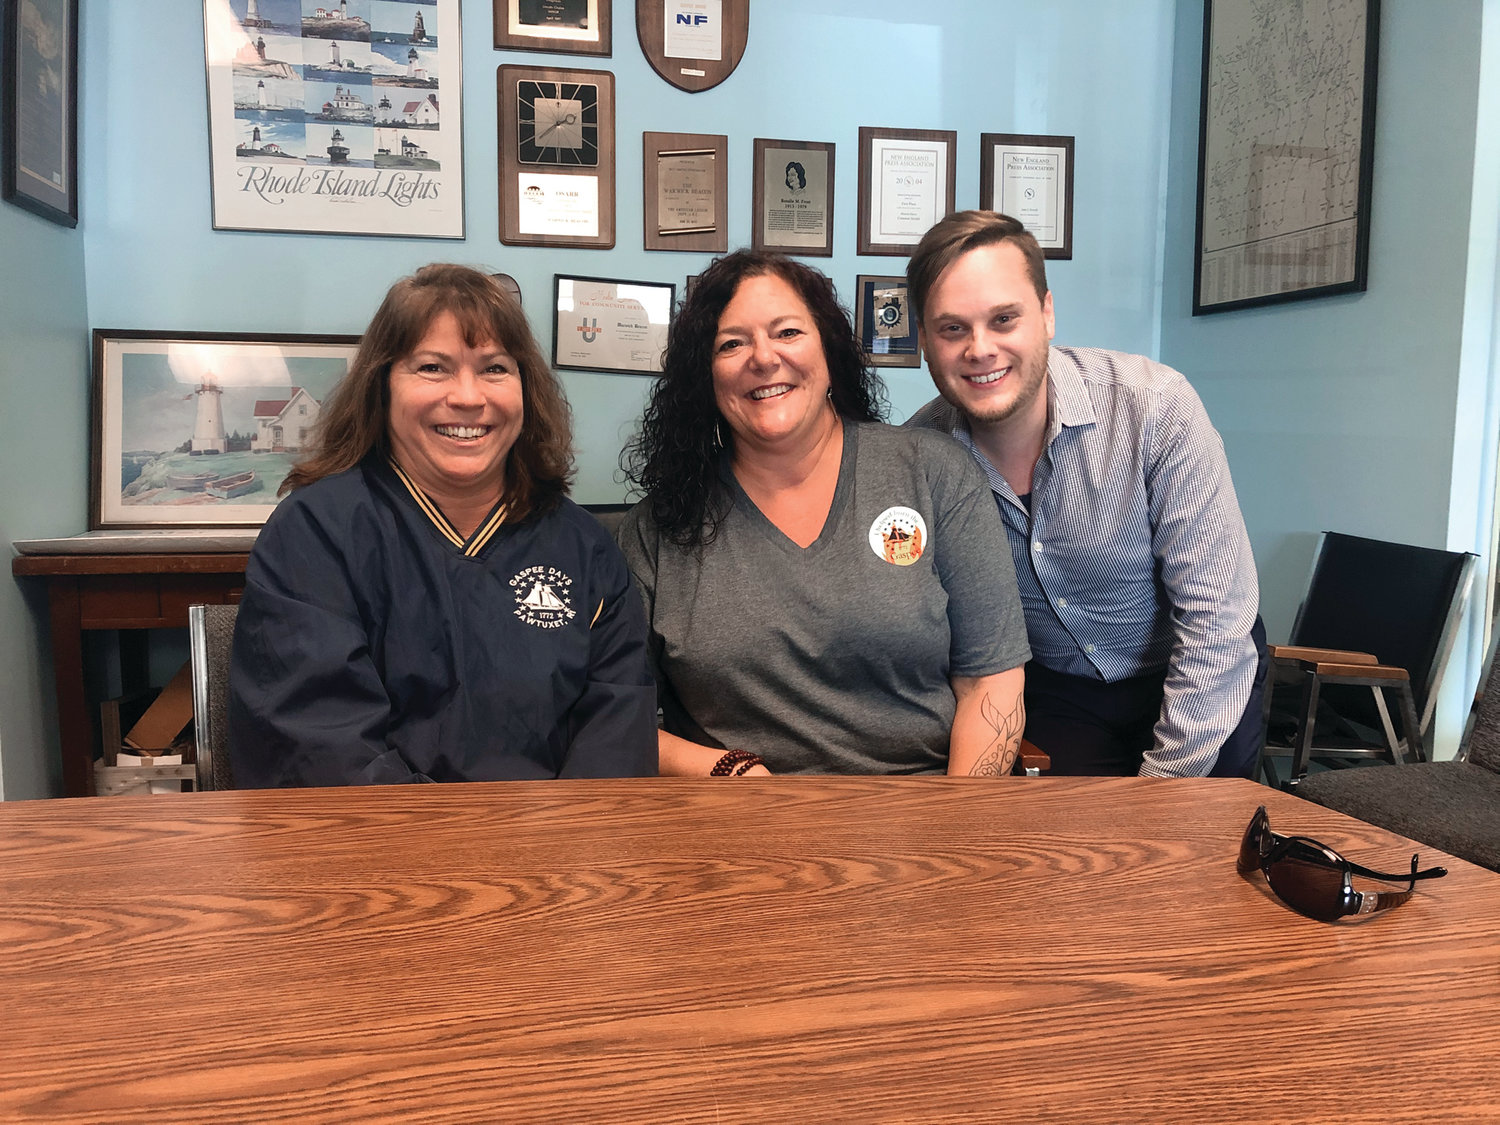 IN THE WORKS: From left to right, Gaspee Days Committee President Gina Dooley, organizer Karen Kenney and past president Ryan Giviens spearheaded the effort to hold the first-ever Gaspee Fall-Out, coming to Pawtuxet Park on Oct. 12 from noon to 5. The event will feature several food vendors, beer tastings and entertainment, all with free admission.